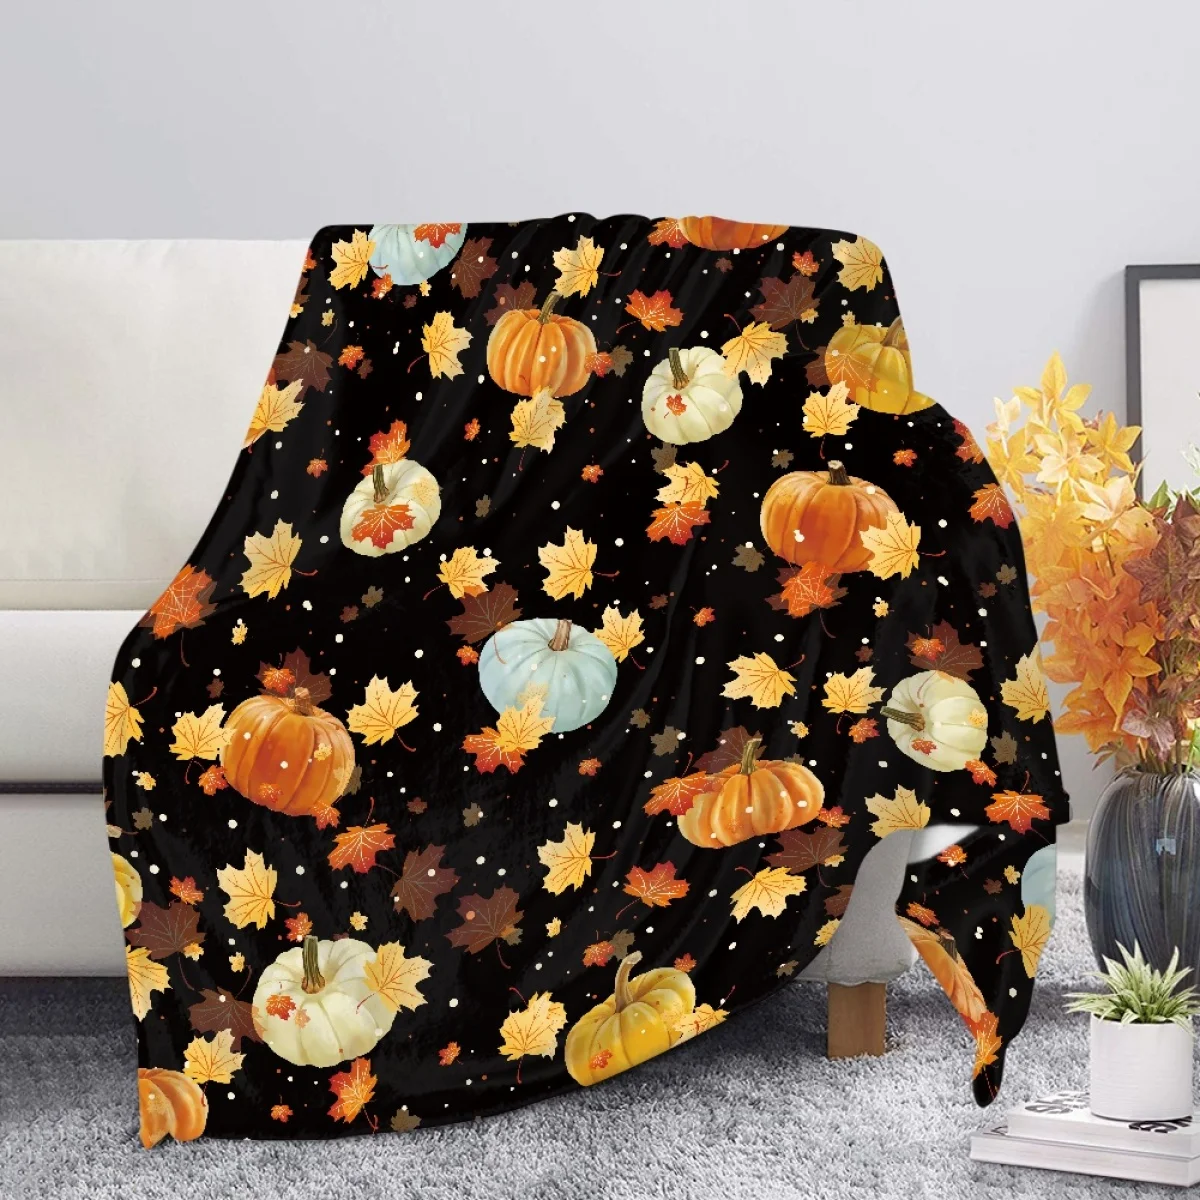 

TOADDMOS Thanksgiving Gift Luxury Pumpkin Harvest Designer Warm Home Throw Blanket for Living Room Bedroom Bed Sofa Picnic Cover